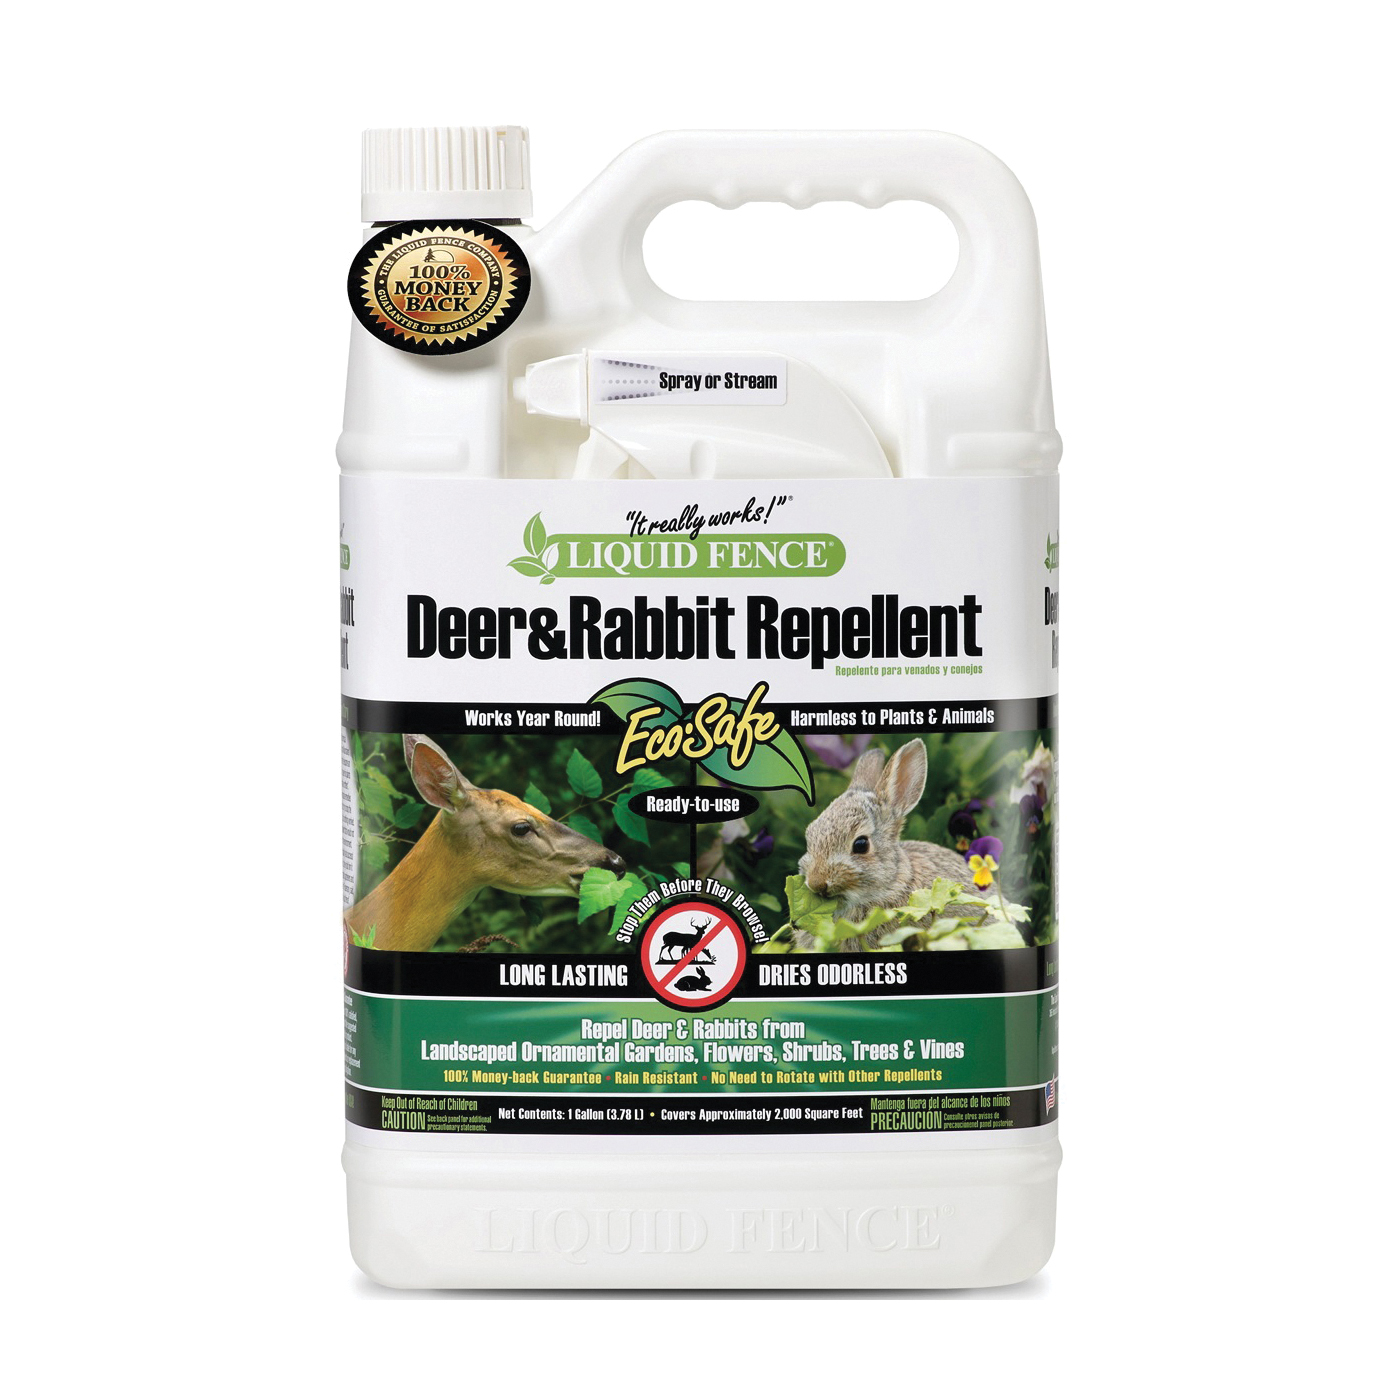 LIQUID FENCE HG-70109 Deer and Rabbit Repellent, Ready-to-Spray - 1